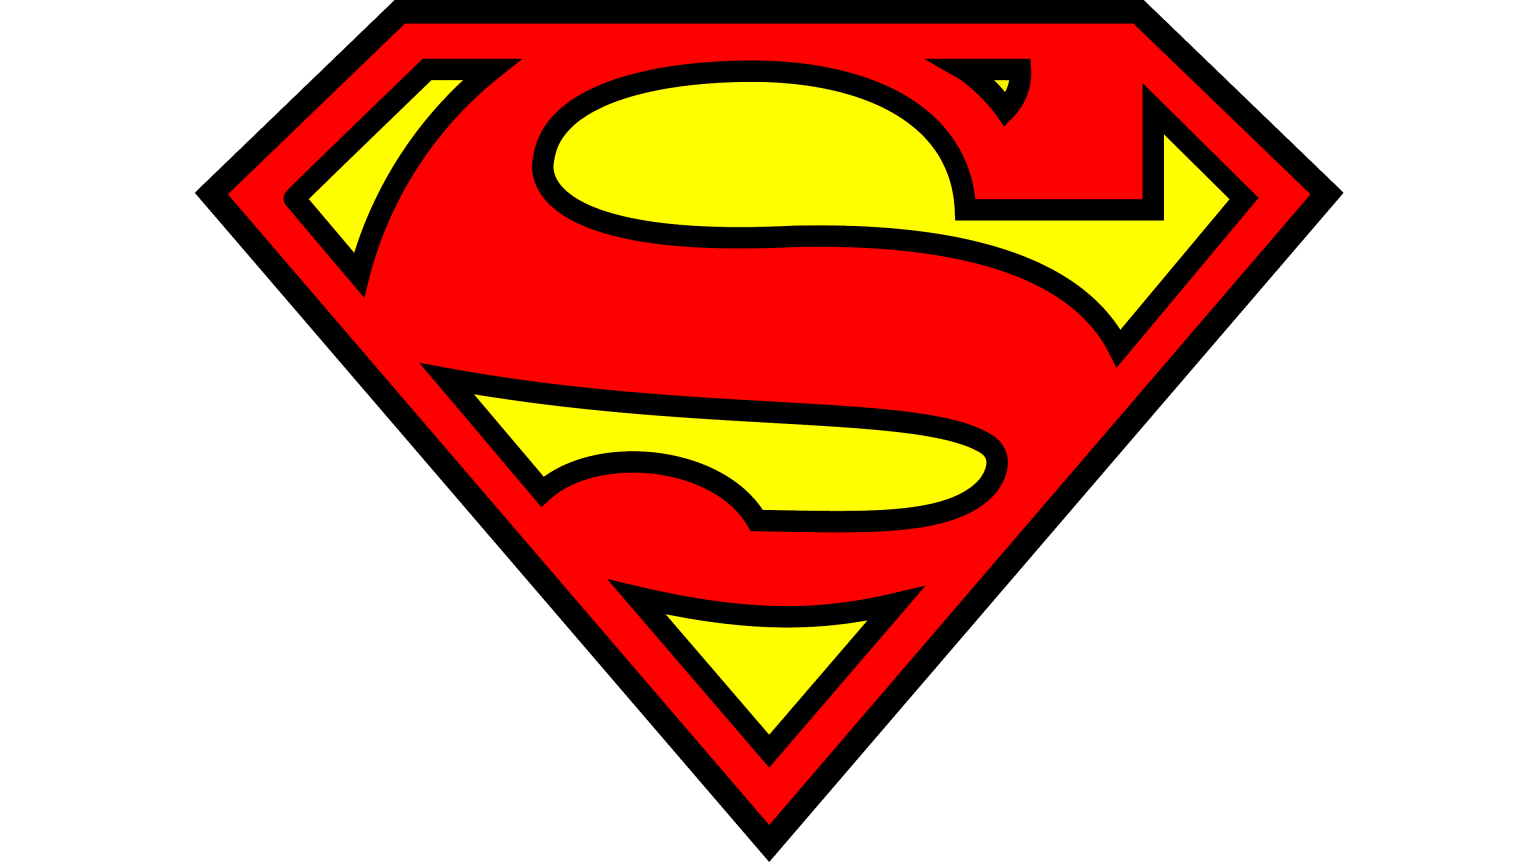 Superman Logo and symbol, meaning, history, sign.